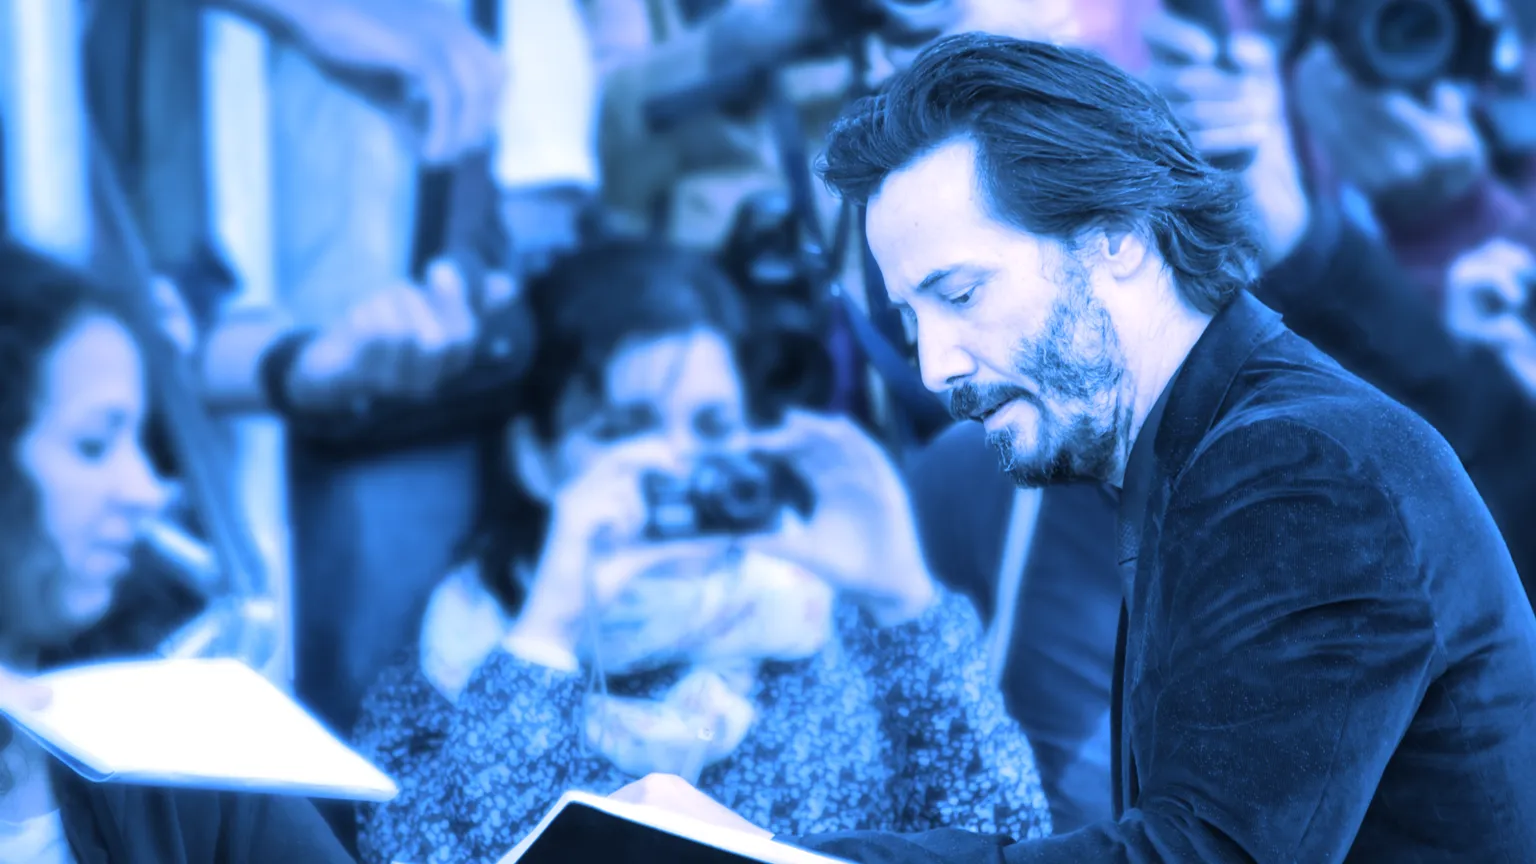 Actor Keanu Reeves of The Matrix series says he holds crypto. Image: Shutterstock